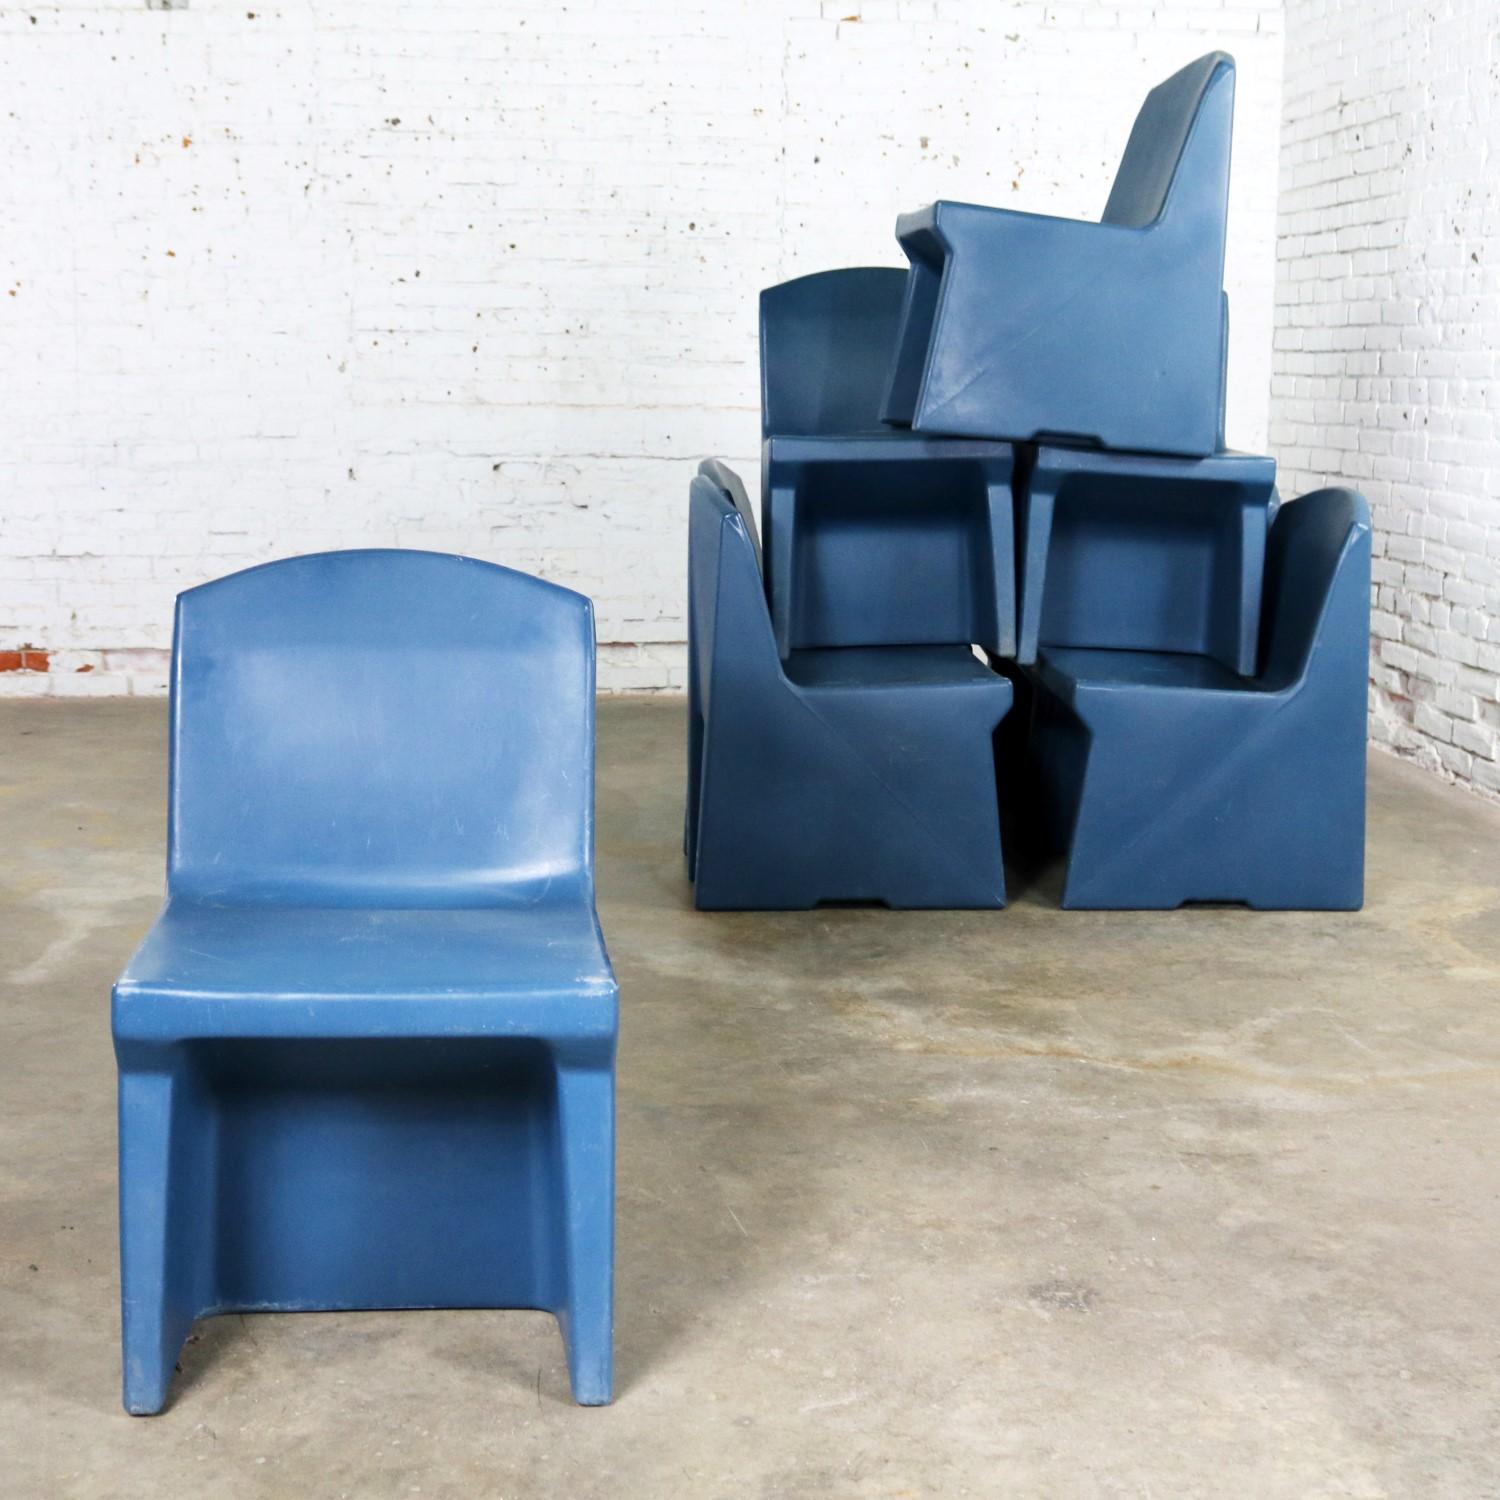 blue molded plastic chairs